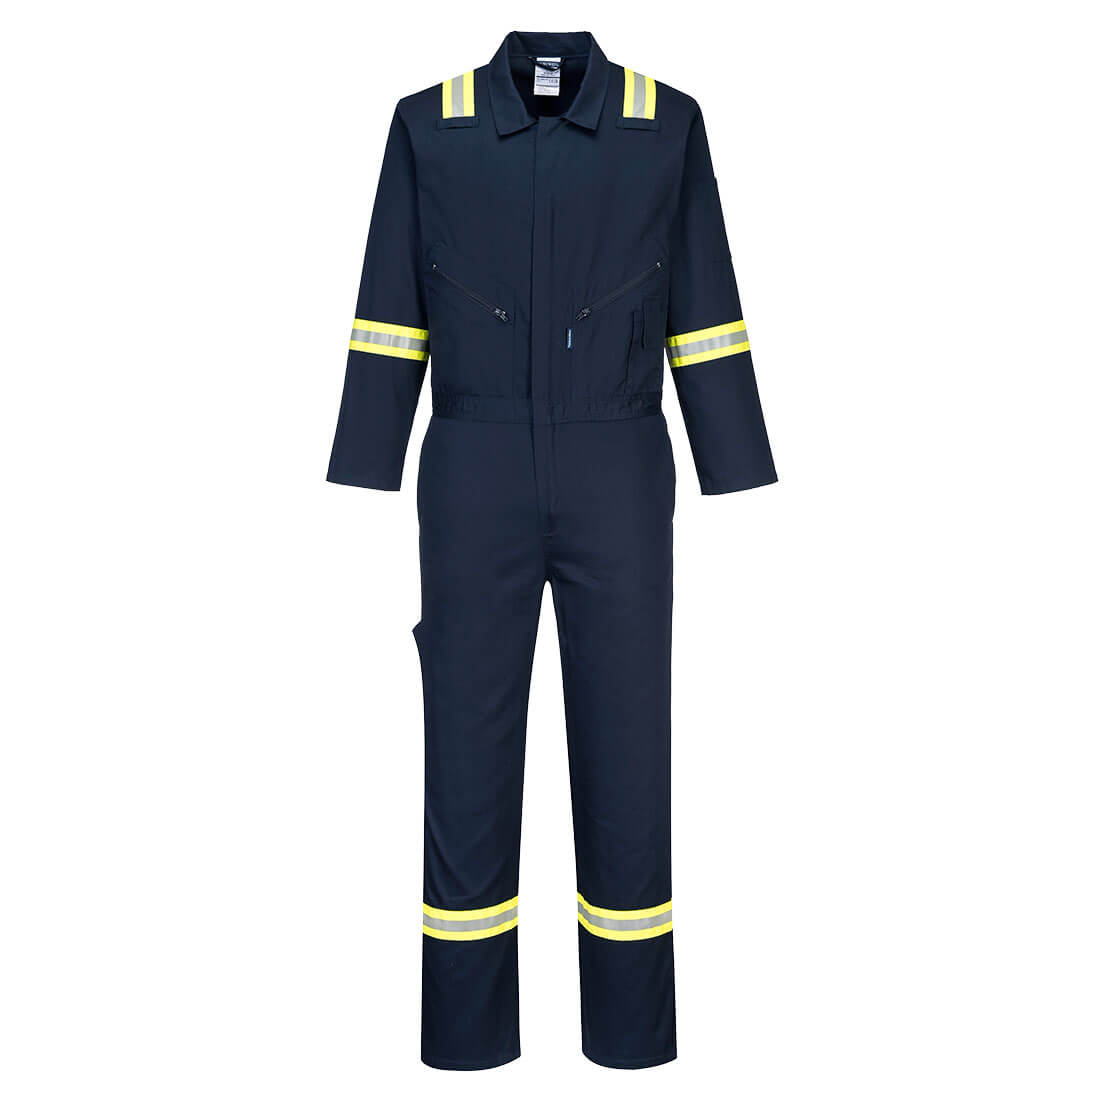 Portwest Iona Xtra Cotton Coverall (F129NAR)